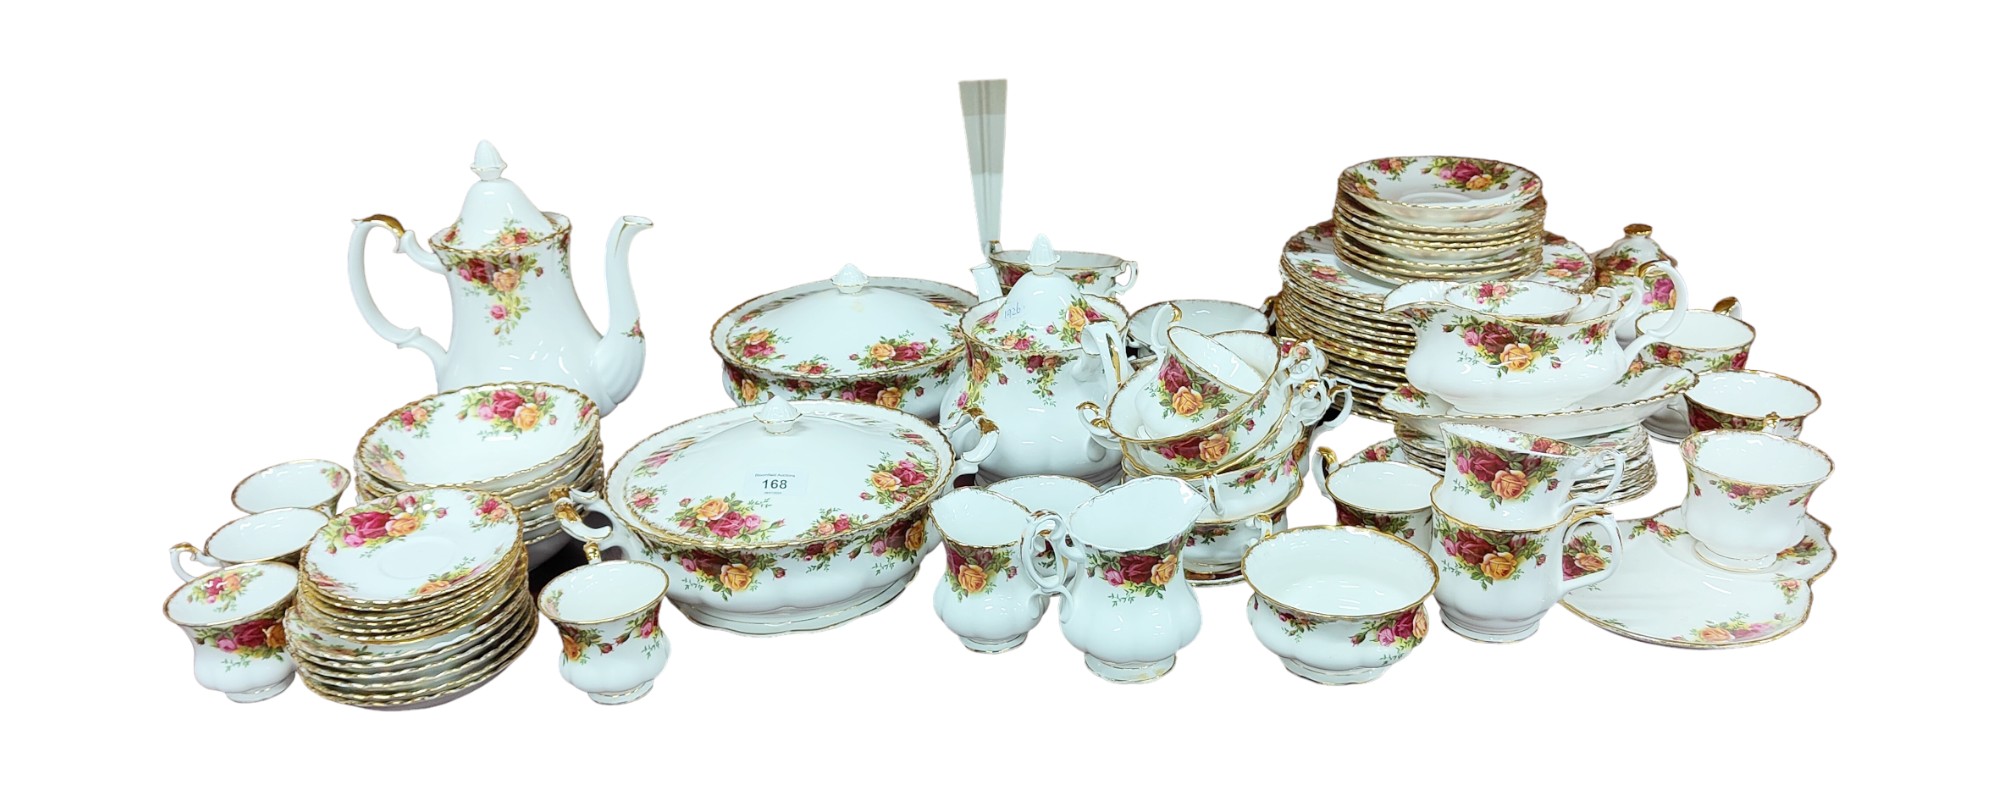 LARGE QUANTITY OF ROYAL ALBERT COUNTRY ROSE DINNER, TEA AND COFFEE SETS